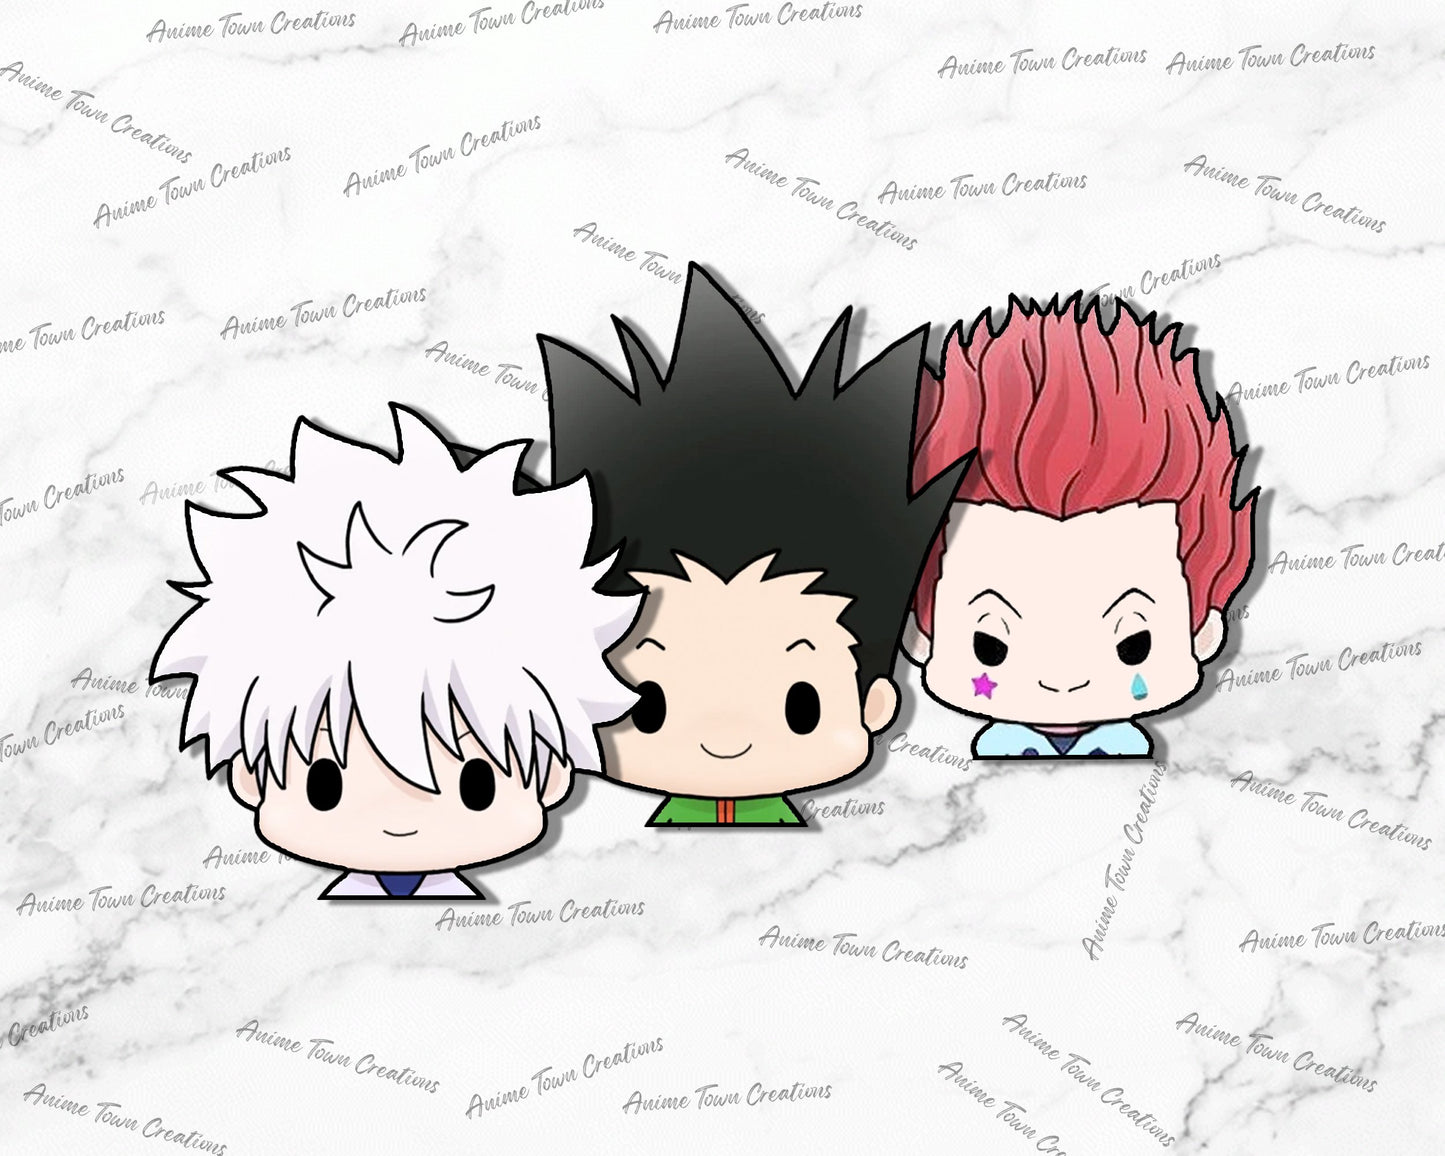 Anime Town Creations Sticker Pack Chibi Hunter x Hunter Peeker 5" Accessories - Anime Hunter x Hunter Pack